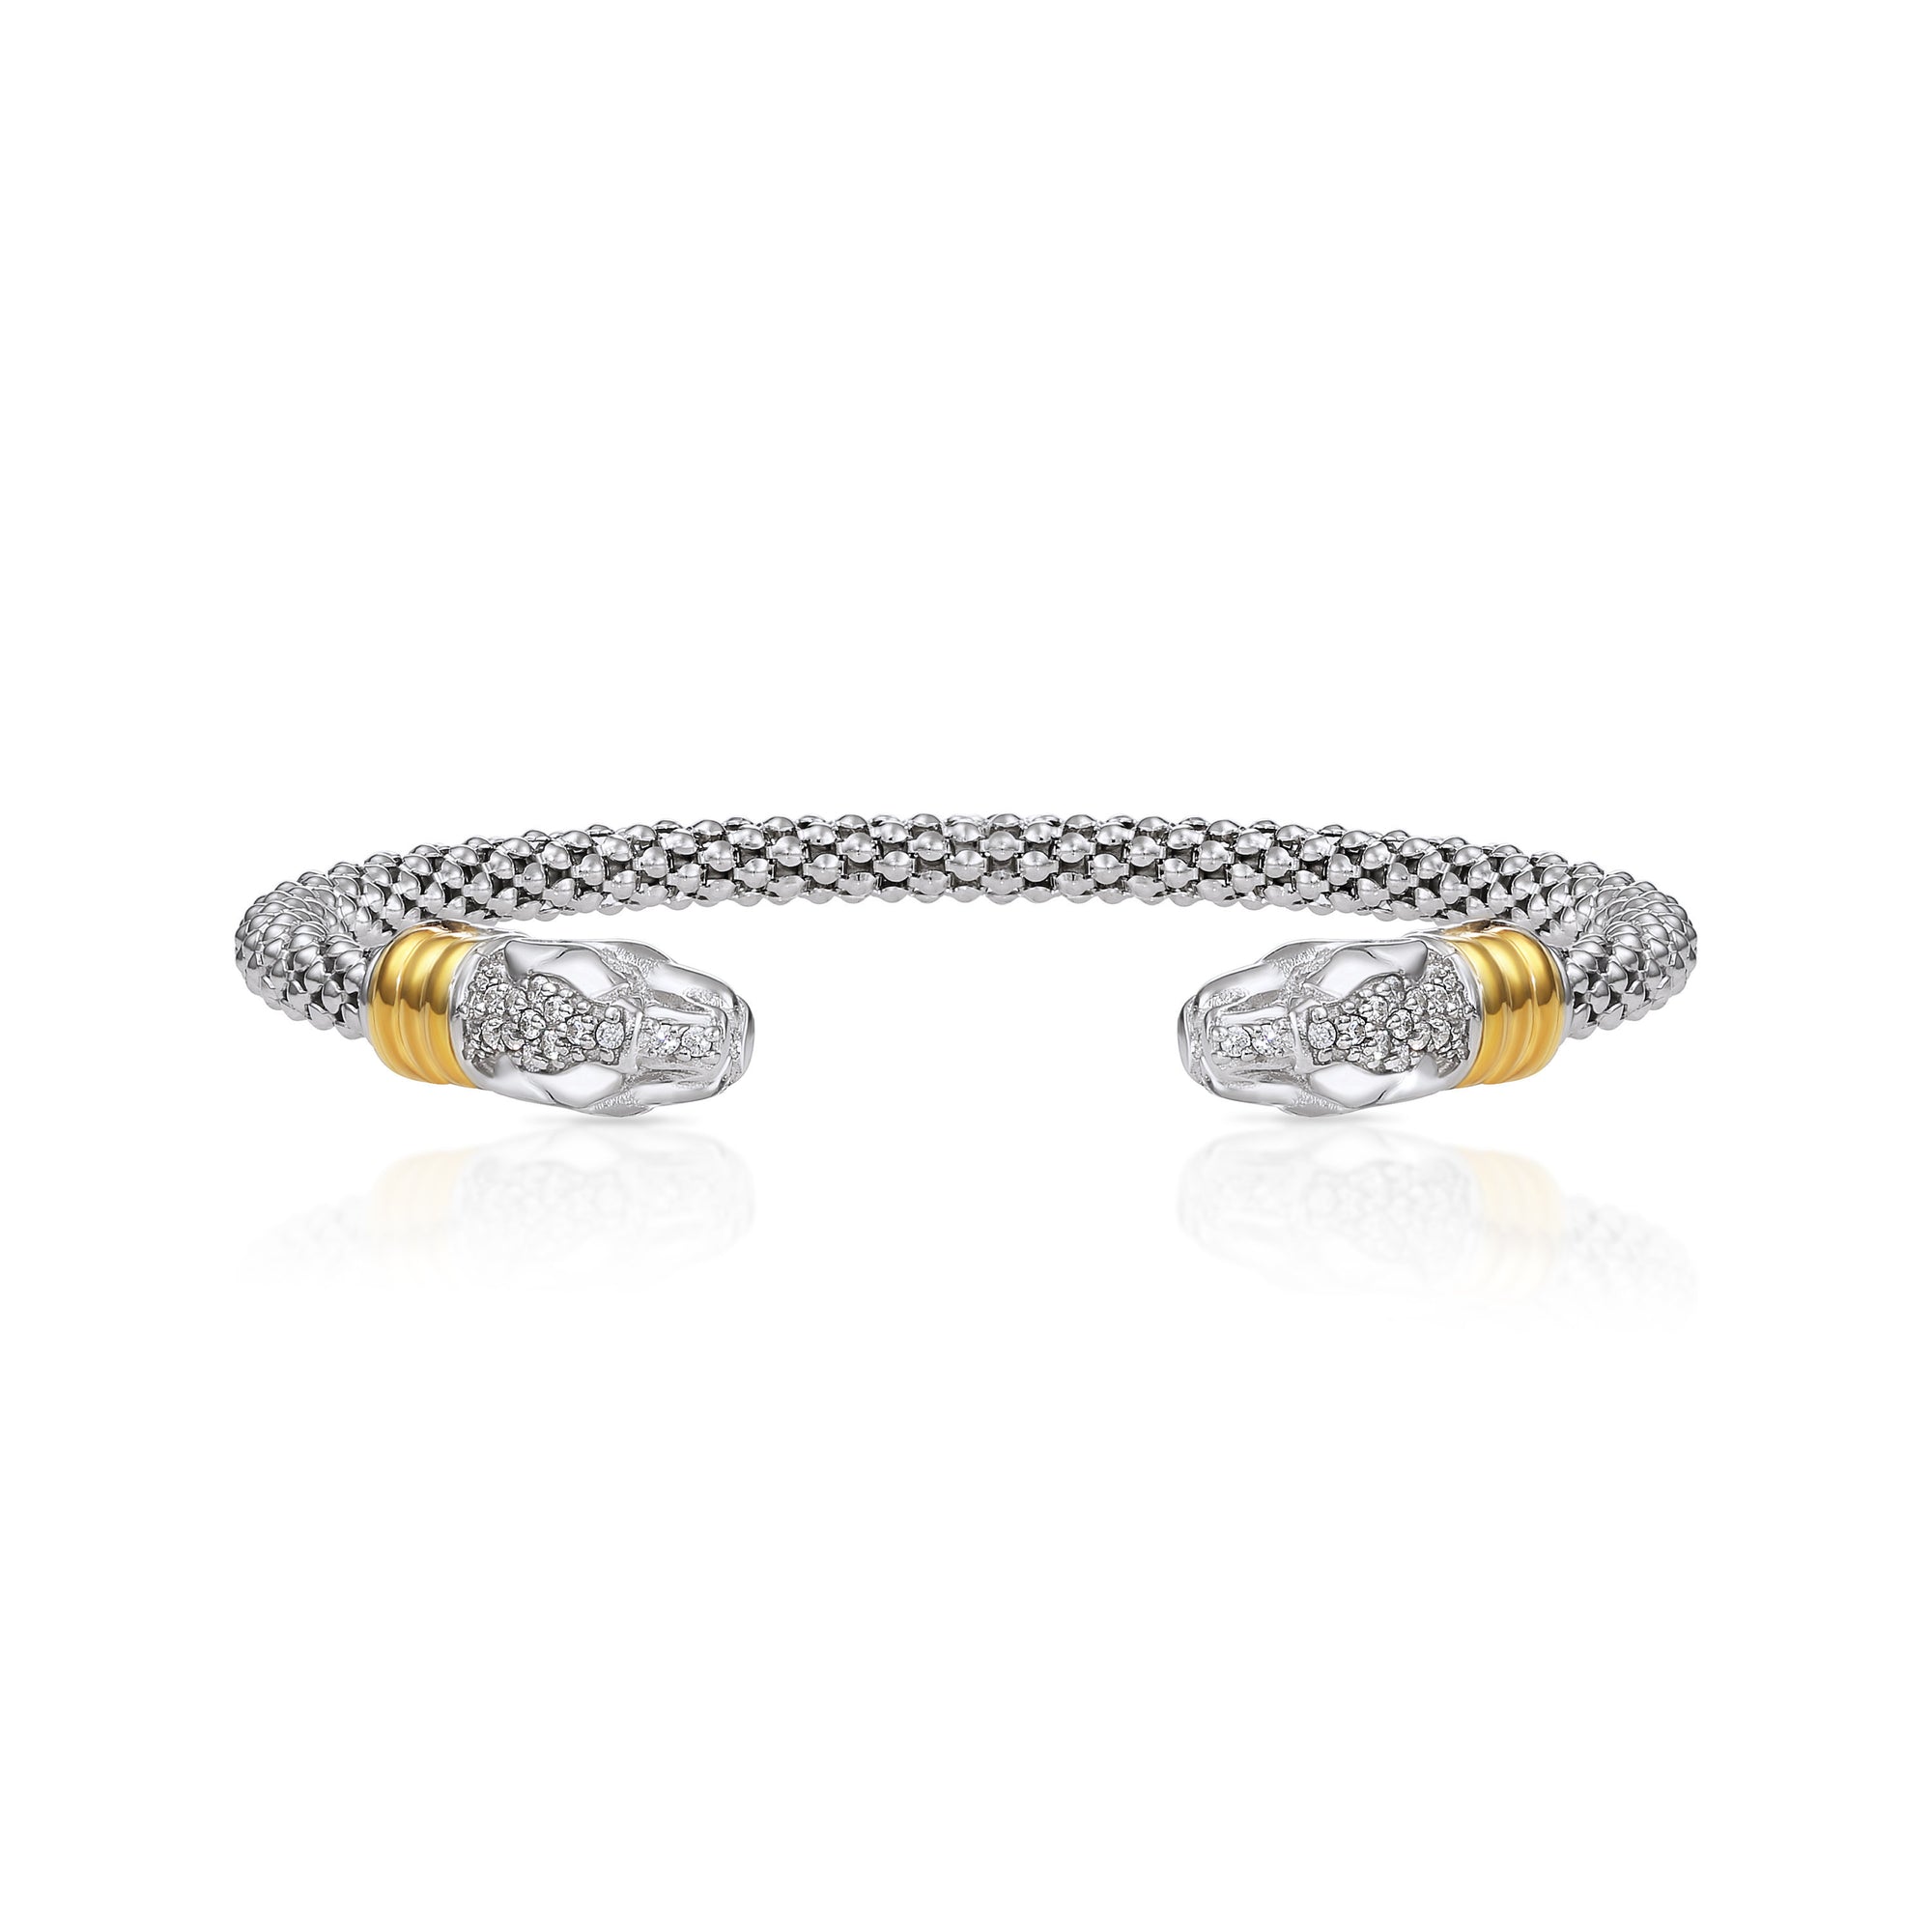 Jaguar Cuff Bracelet in Sterling Silver with Gold Accents